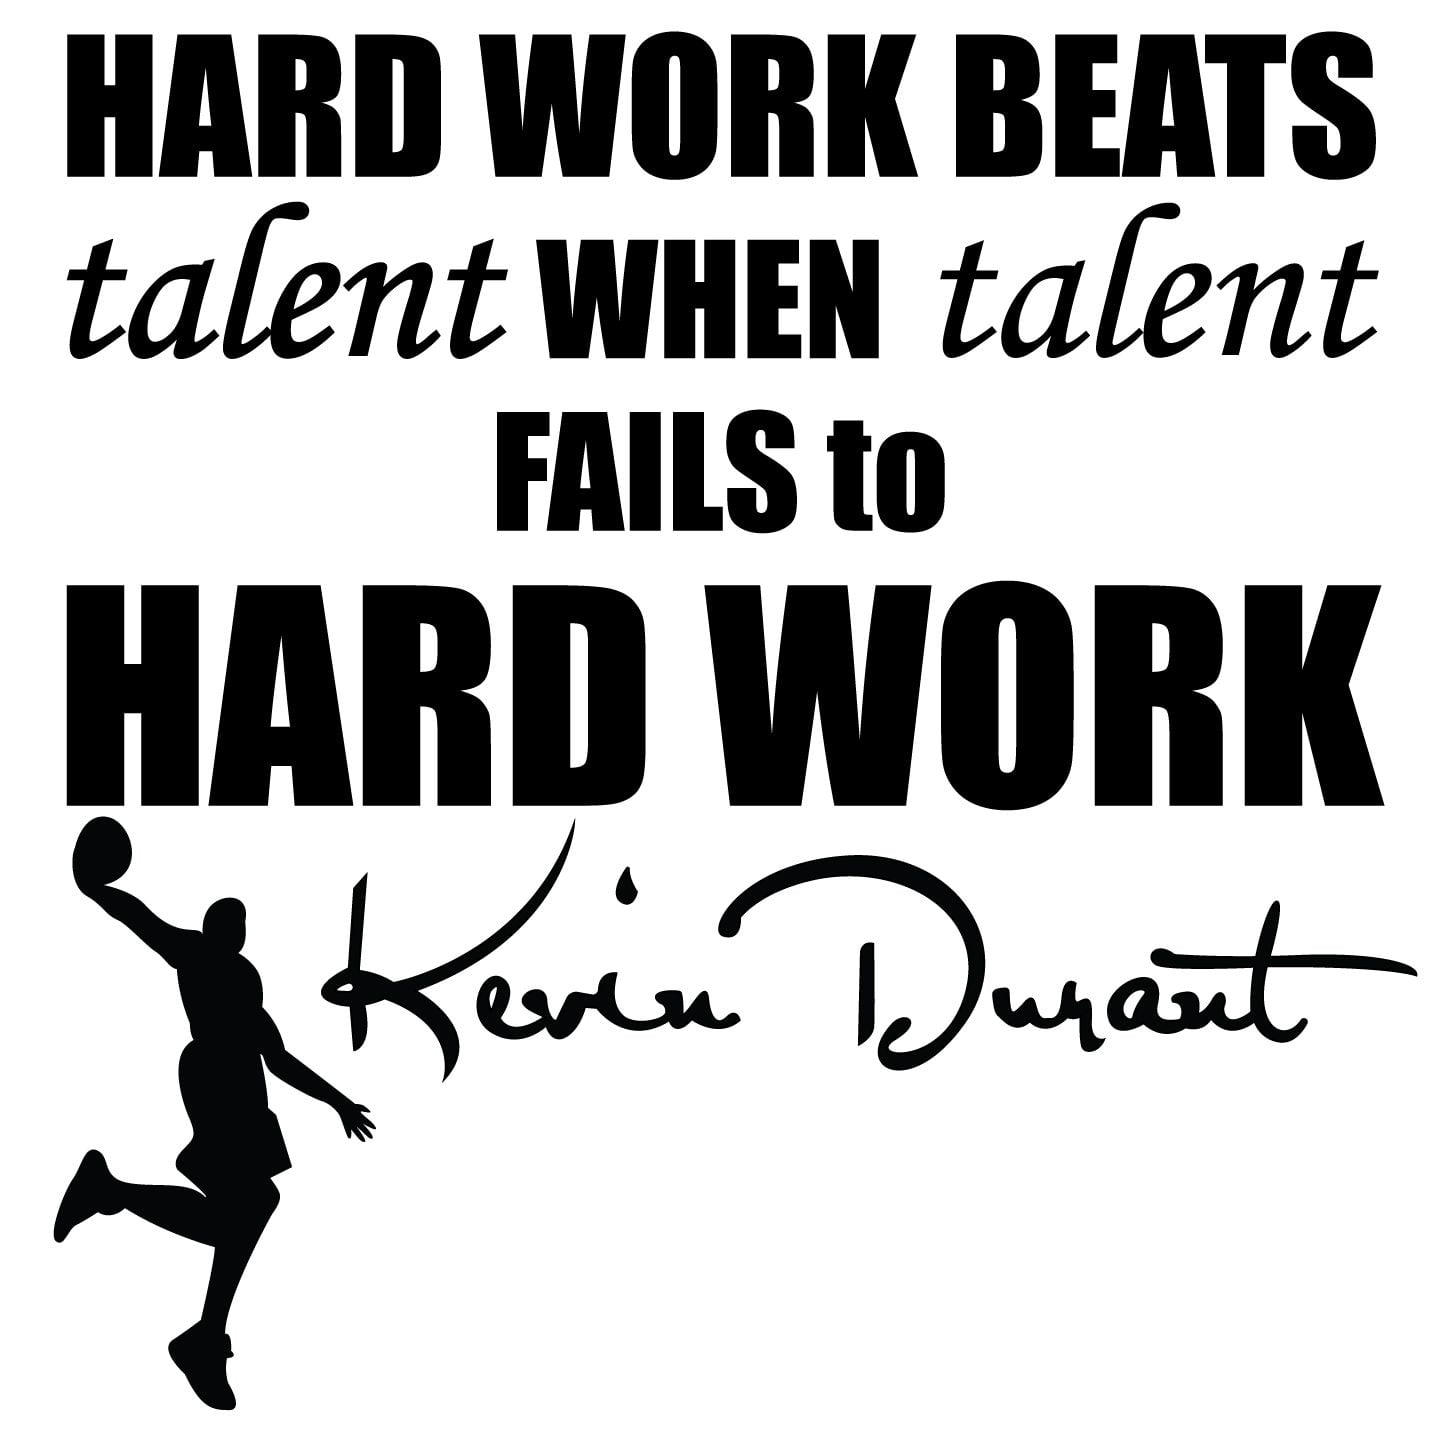 kevin durant quotes hard work